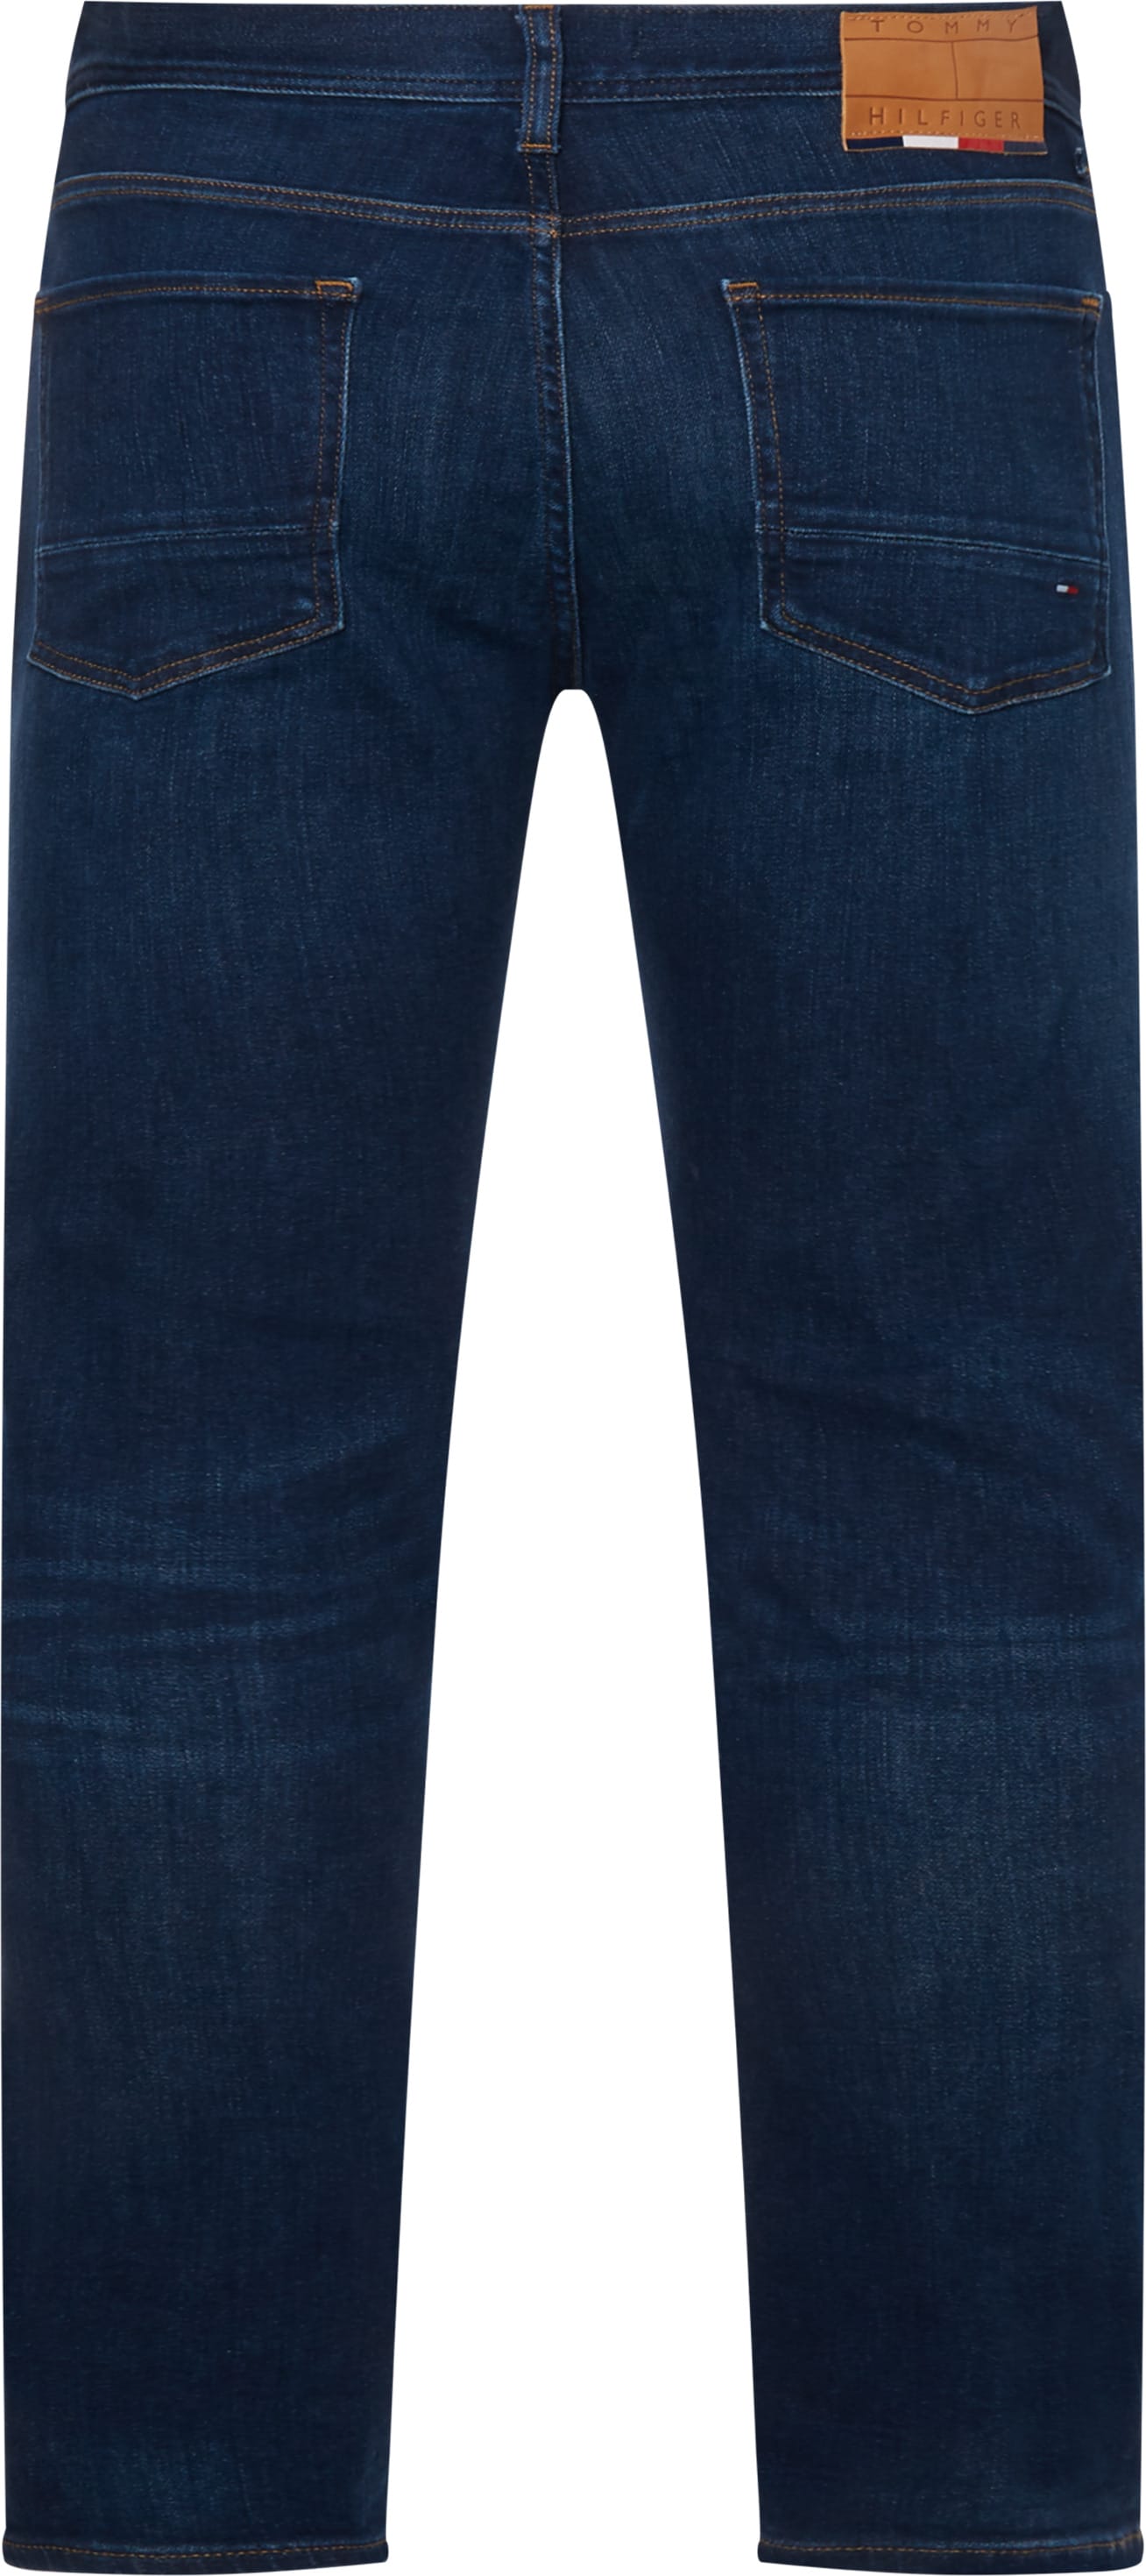 Men's trousers with logo on the back